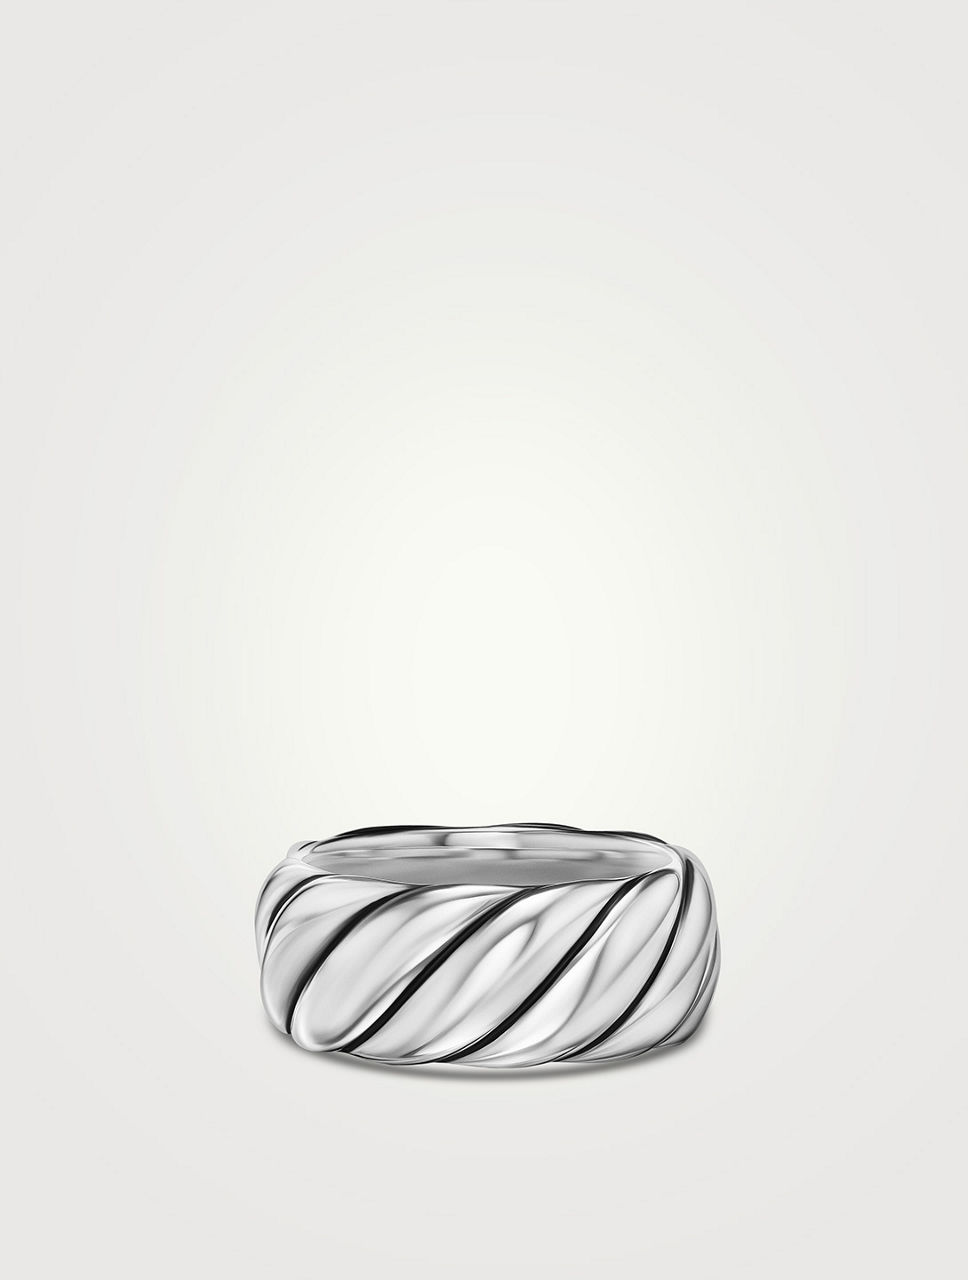 Sculpted Cable Band Ring Sterling Silver, 9mm